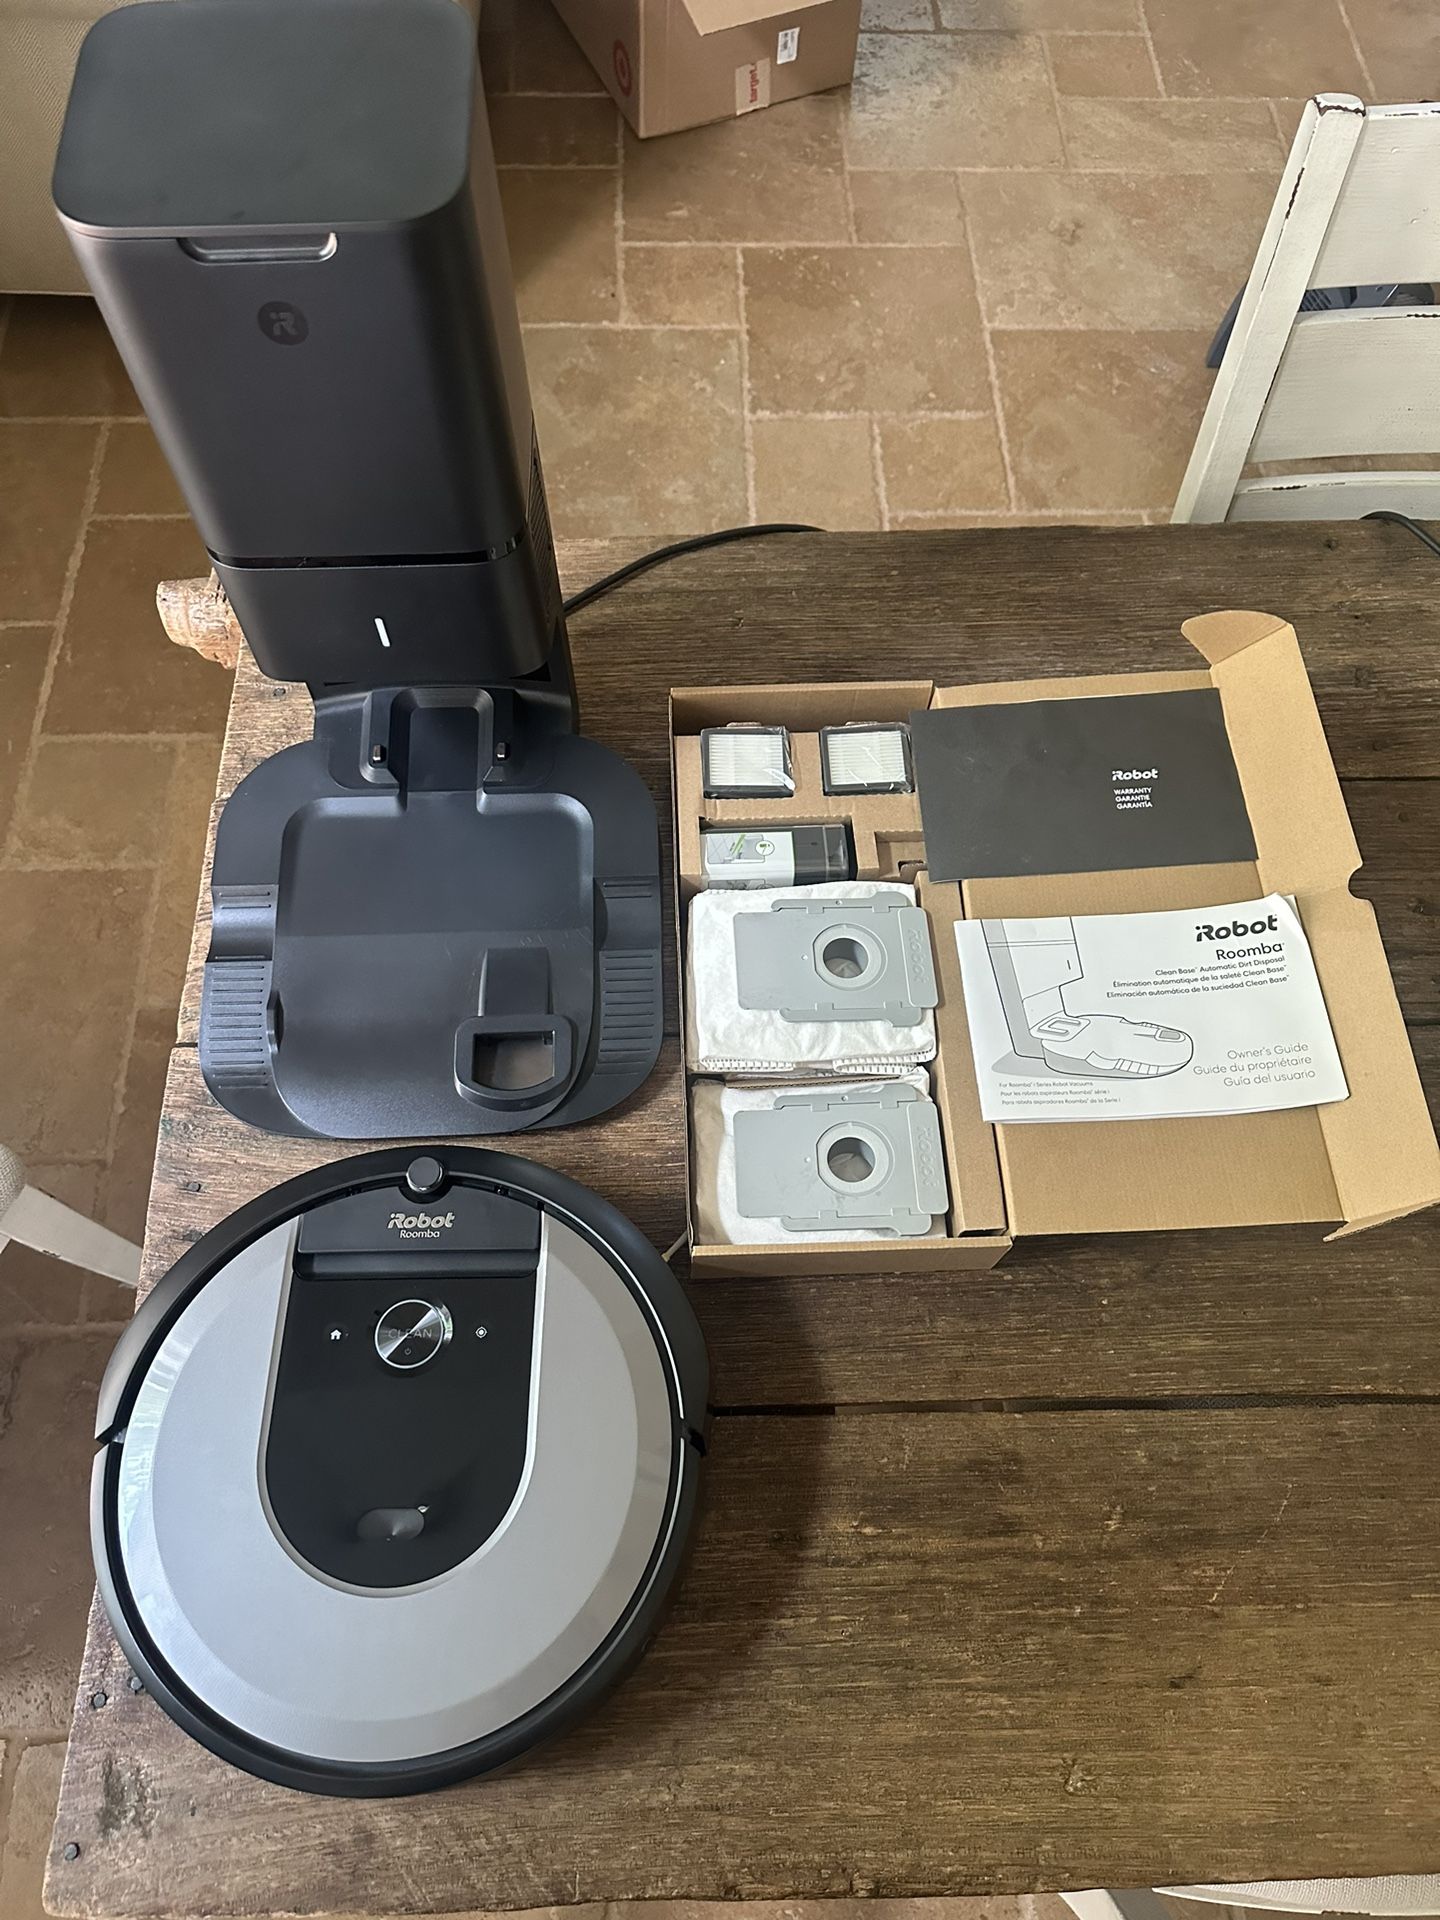 New iRobot Roomba i8+ Wi-Fi connected robot vacuum With Automatic Dirt Disposal